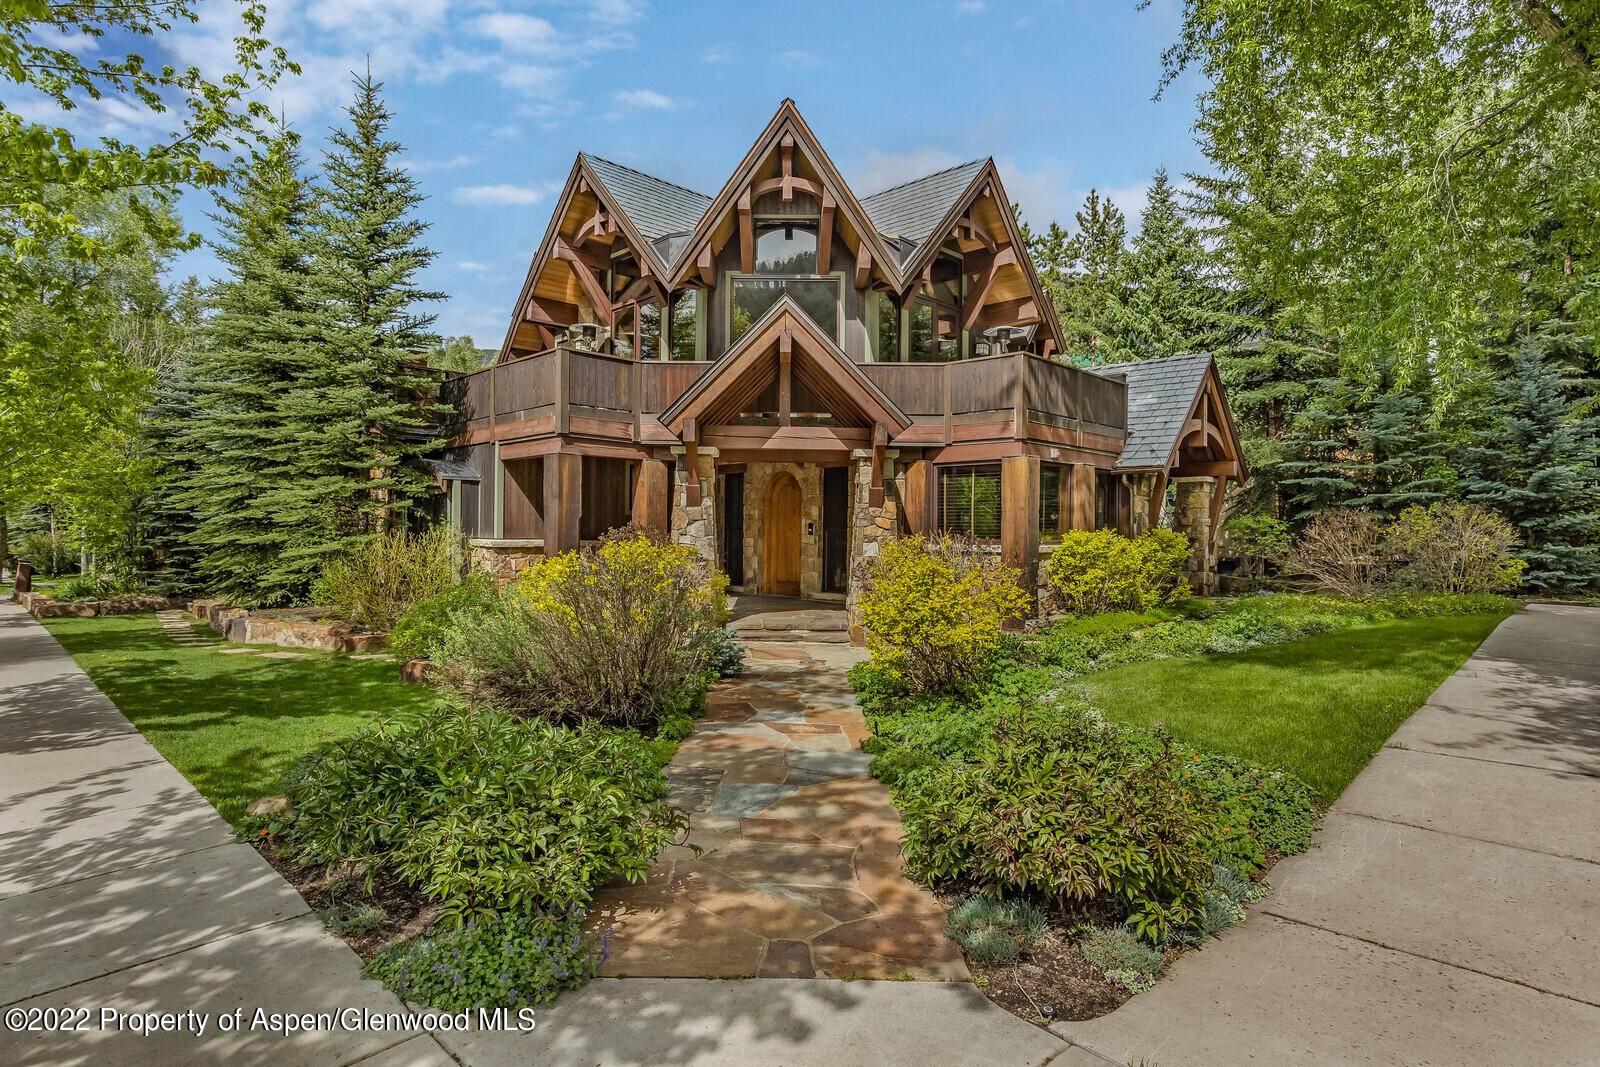 This magnificent and timeless Mountain home is situated on a prime corner lot in the heart of the Aspen Core.